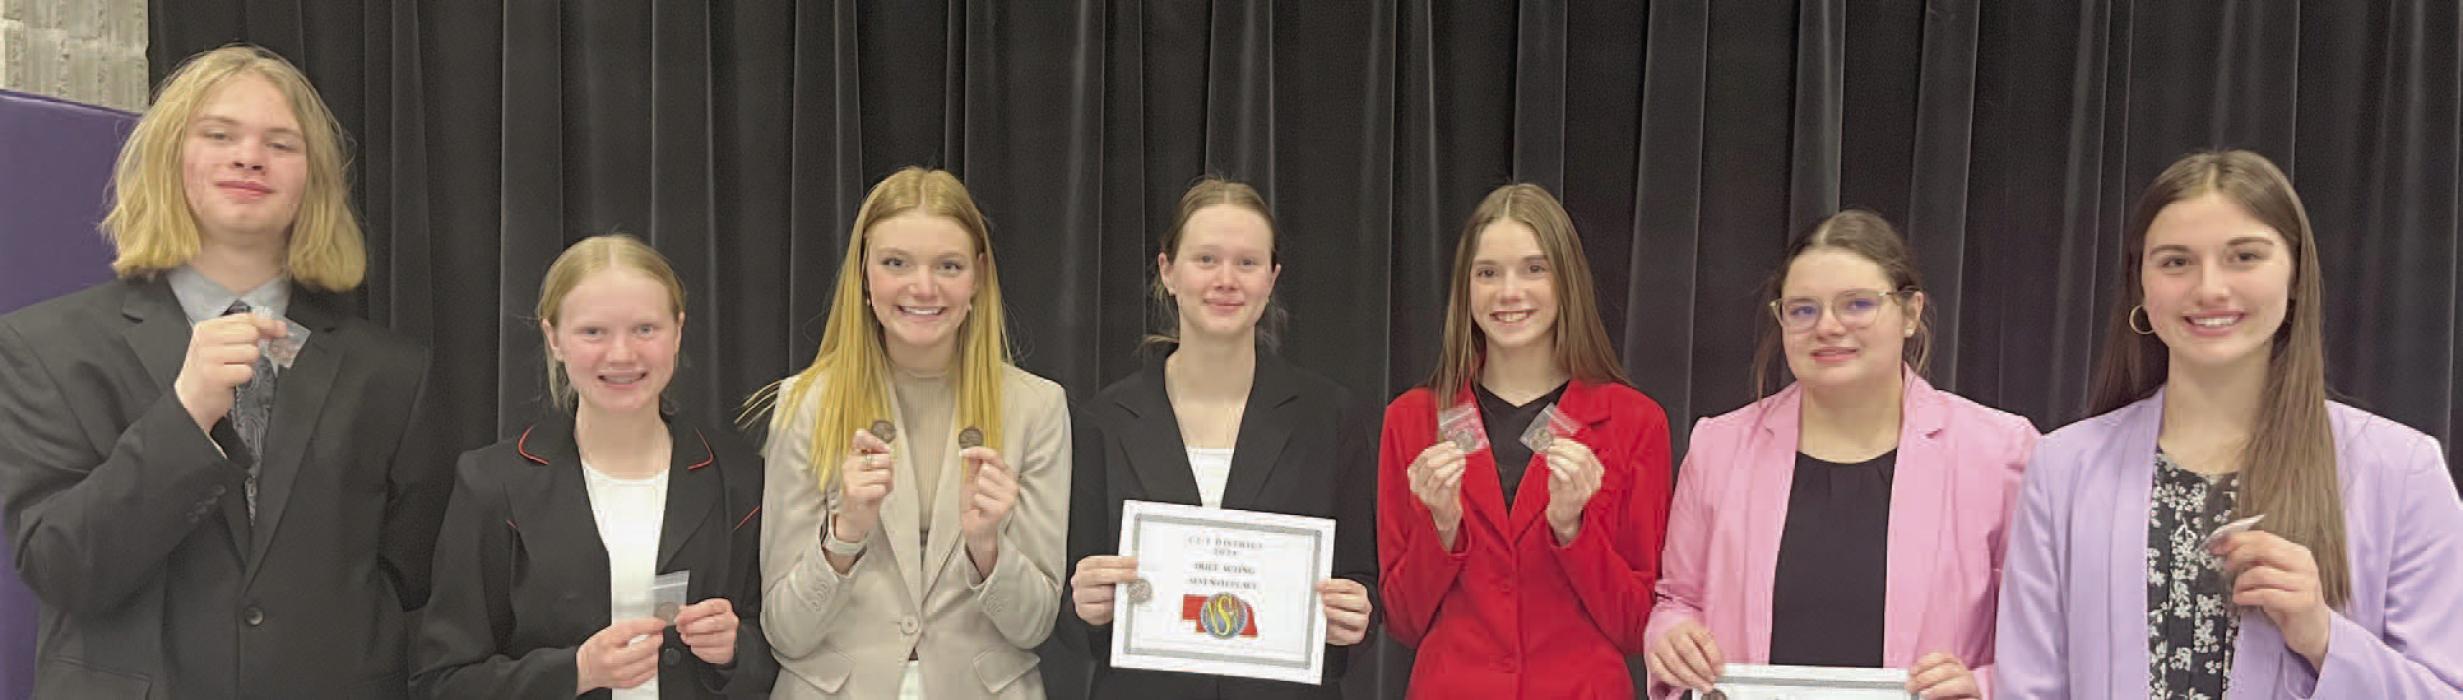 Bringing home medals from the District Speech Contest were Ainsworth students (Left to Right): Erick Hitchcock, Kiley Orton, Brianna Starkey, Puridy Haley, Taylor Allen, Hannah Beel, and Willa Flynn.